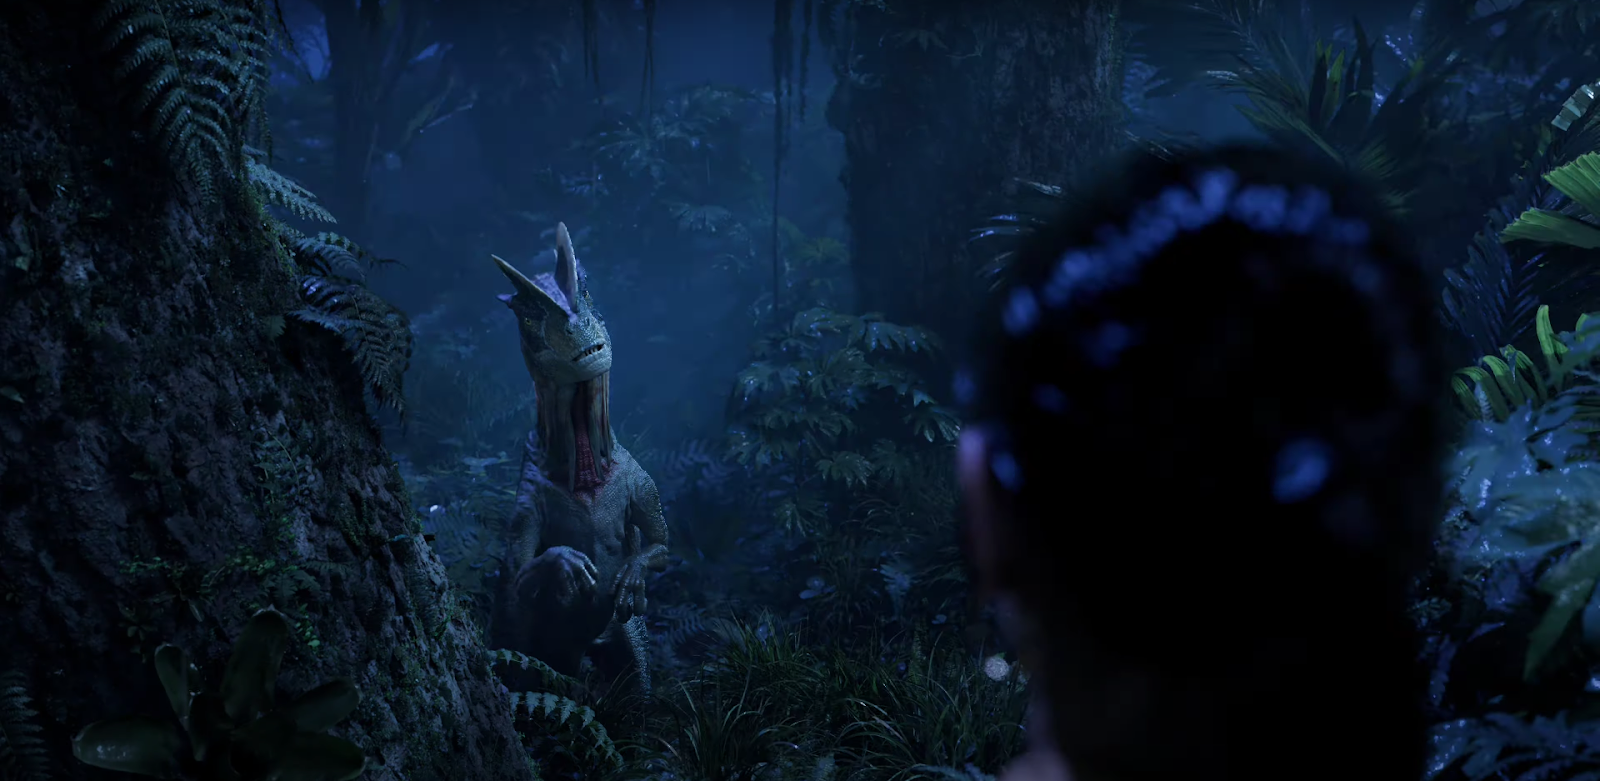 Jurassic Park: Survival Is A New Single-Player Action Adventure Based On  The Iconic Franchise